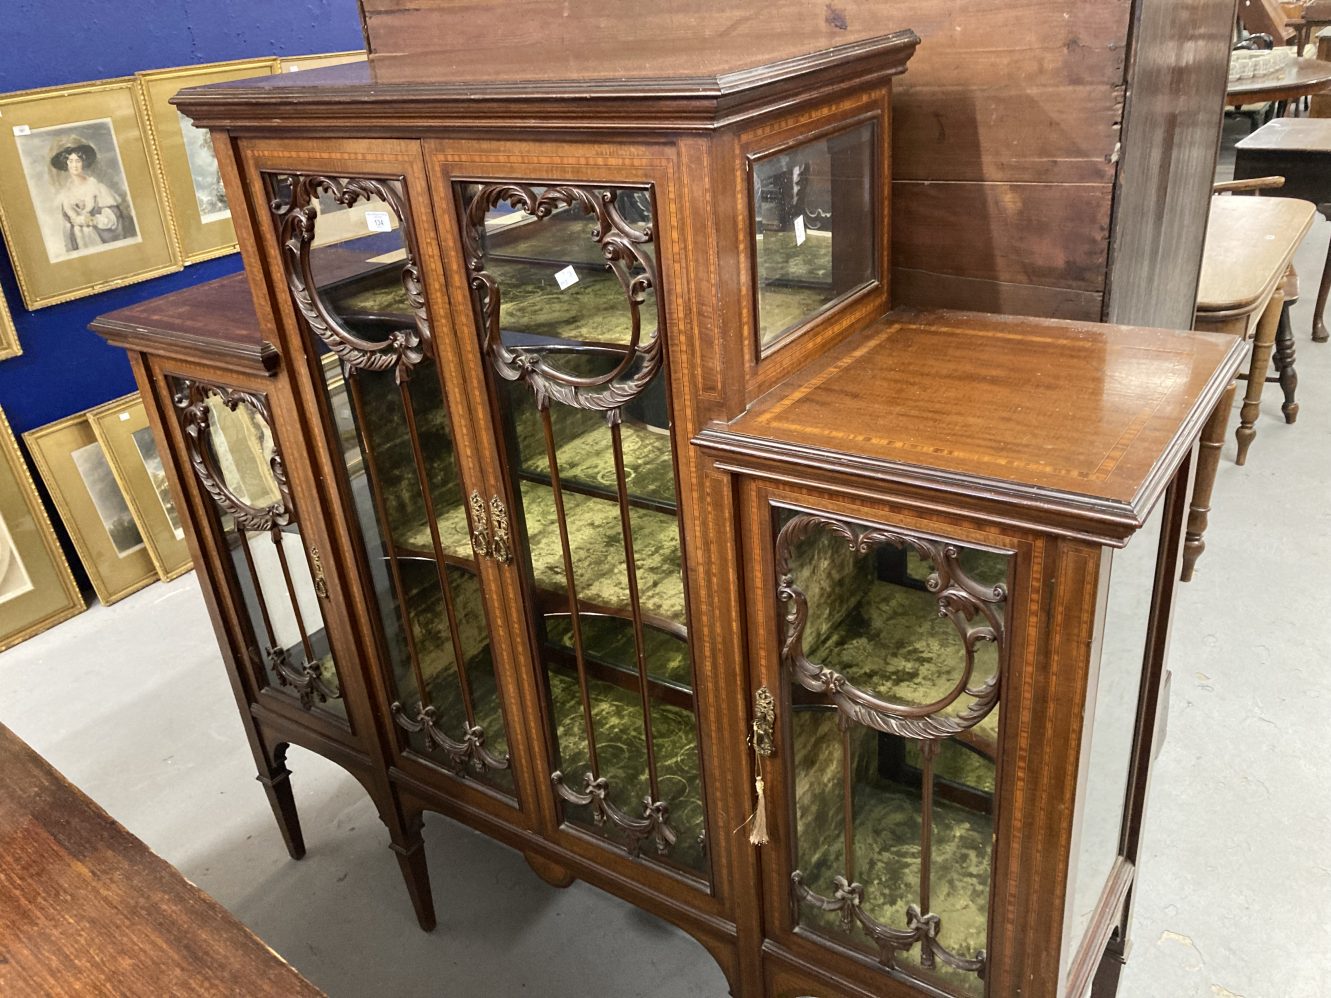 Edwardian inlaid mahogany china display cabinet with three compartments, moulded top and front